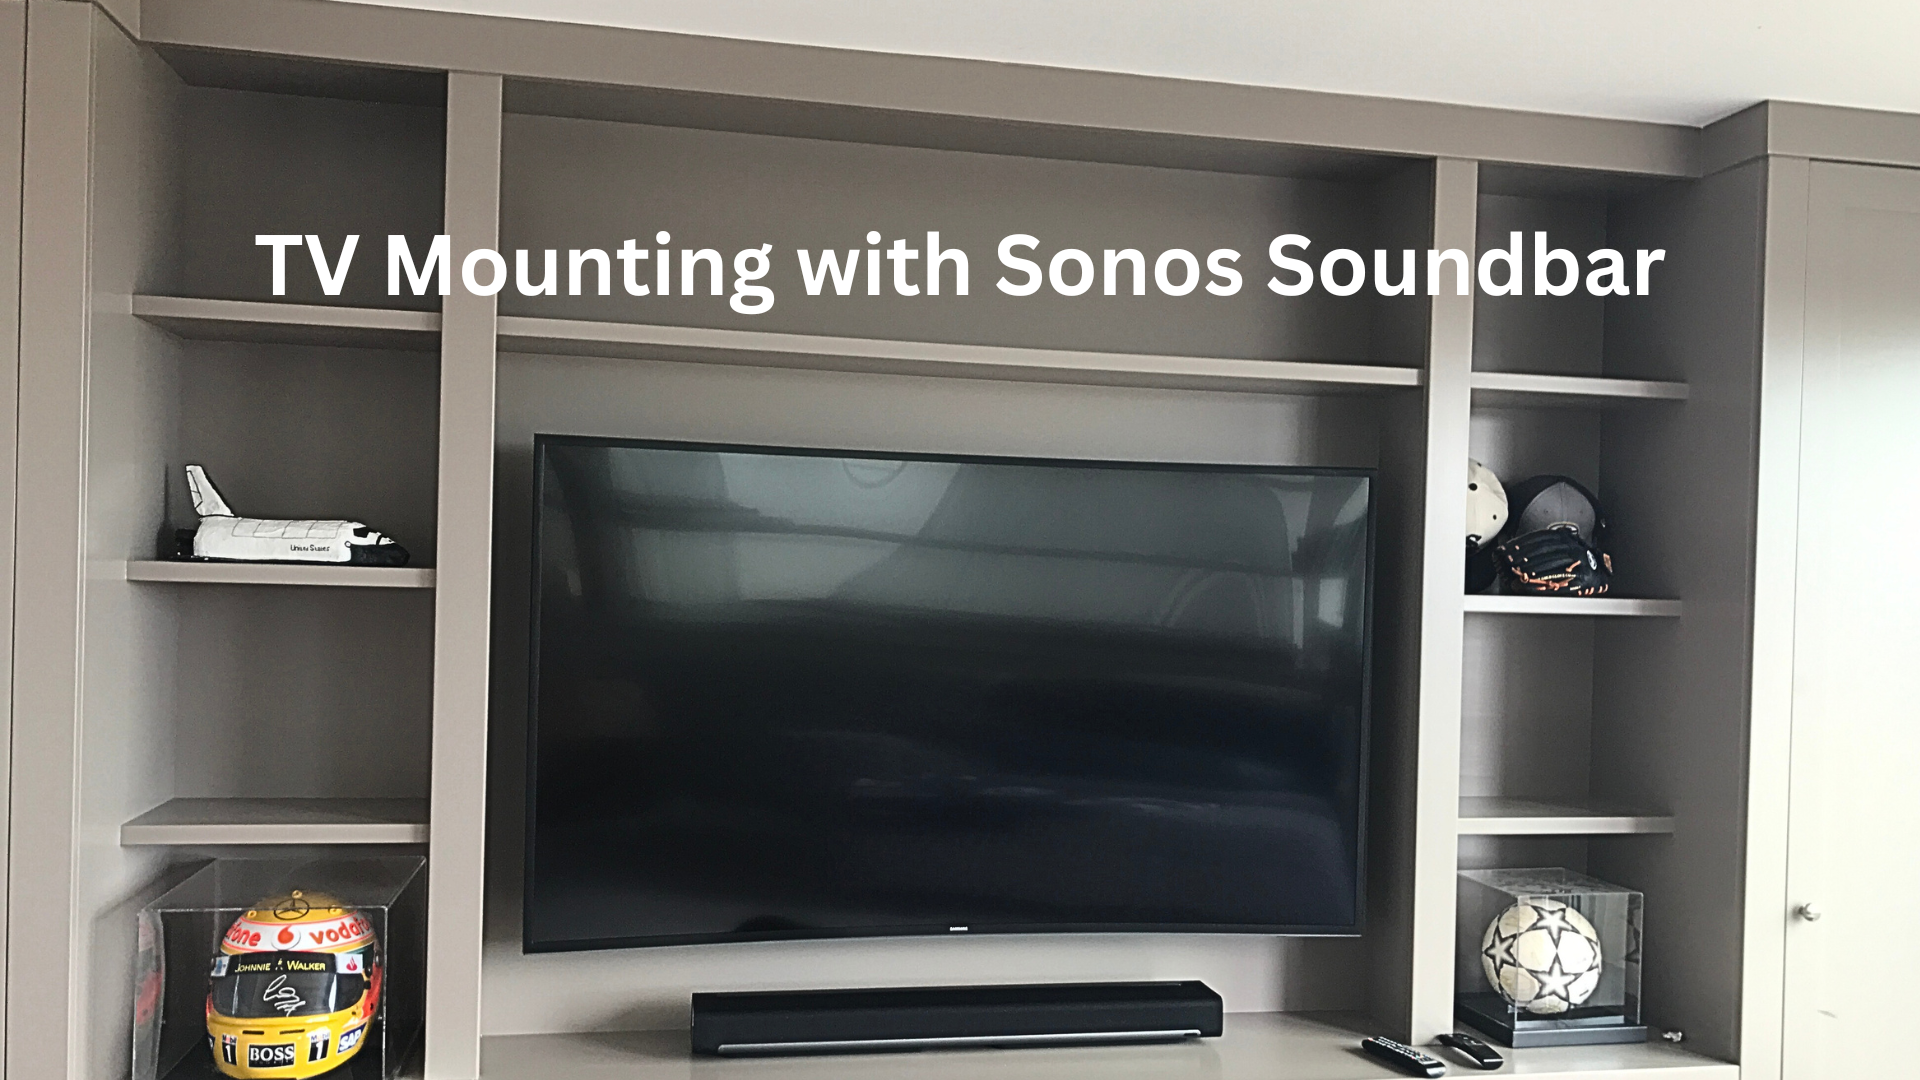 A newly installed home cinema system by professional TV installers, featuring a large mounted screen surrounded by speakers for an immersive viewing experience.